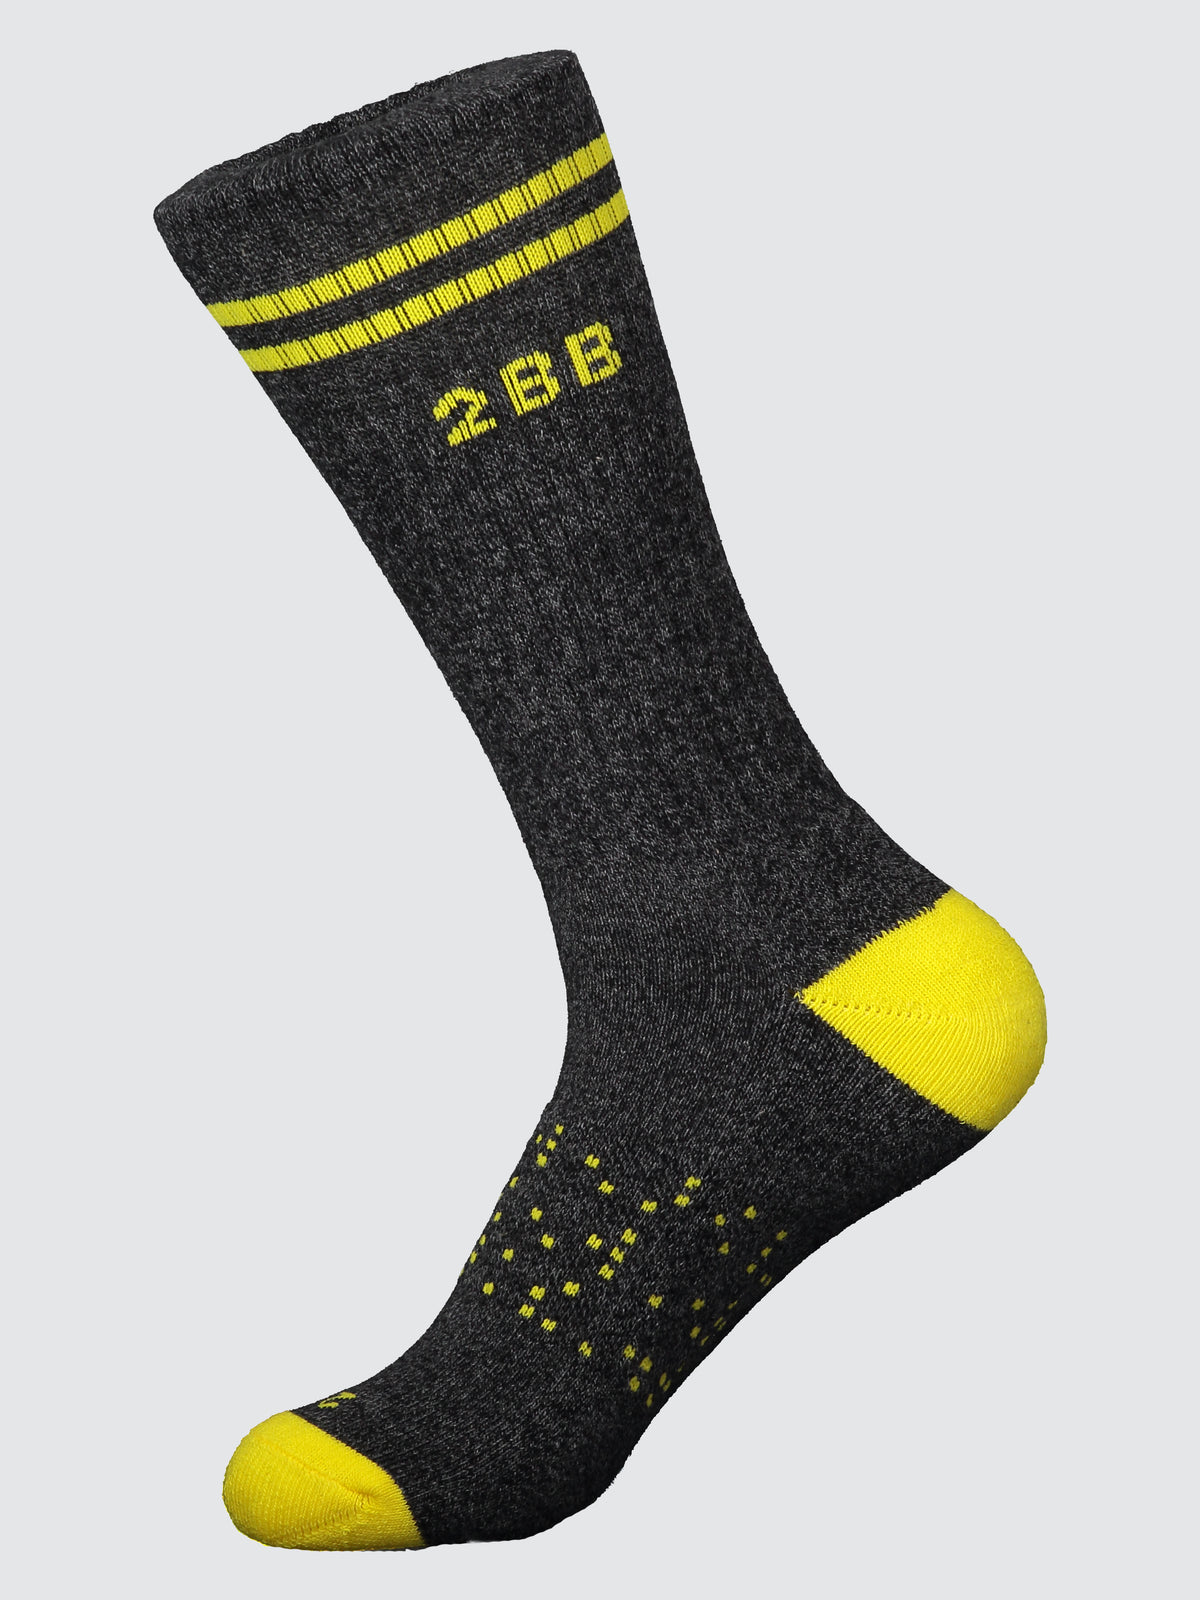 Calf Socks – Two Blind Brothers